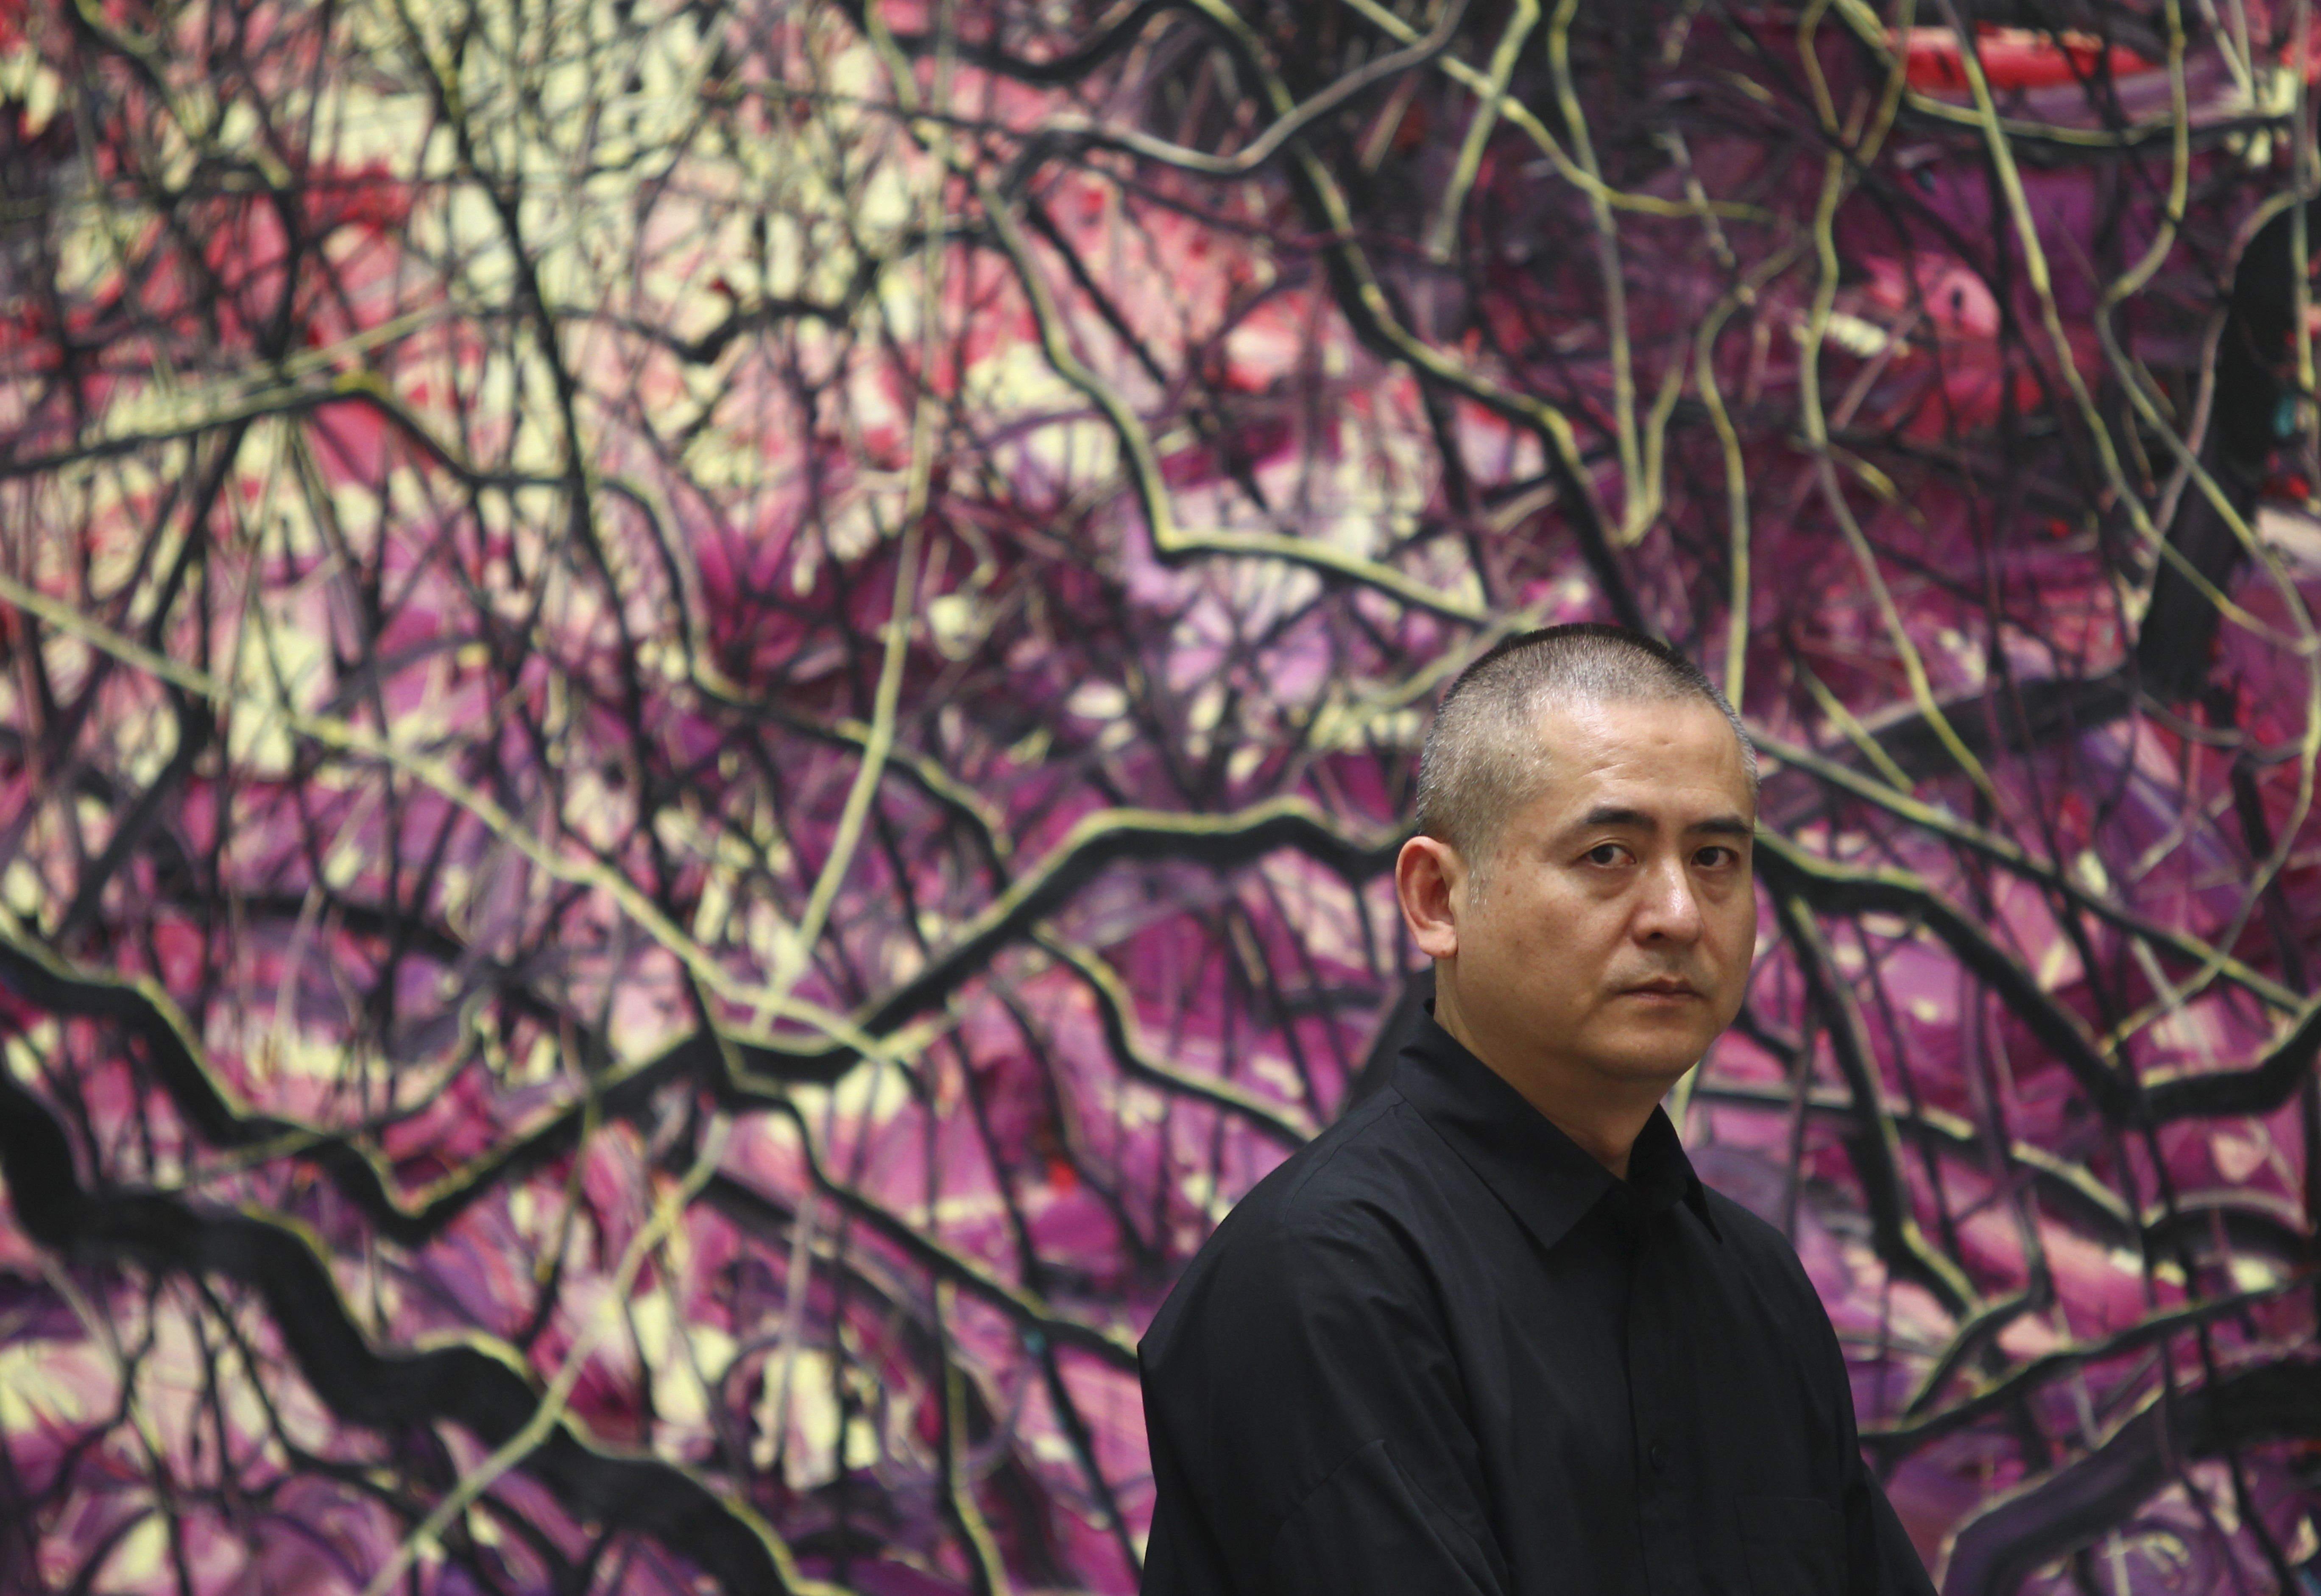 Zeng Fanzhi, one of China's most famous painters, will have his works displayed at The Feuerle Collection in Berlin. Photo: AFP